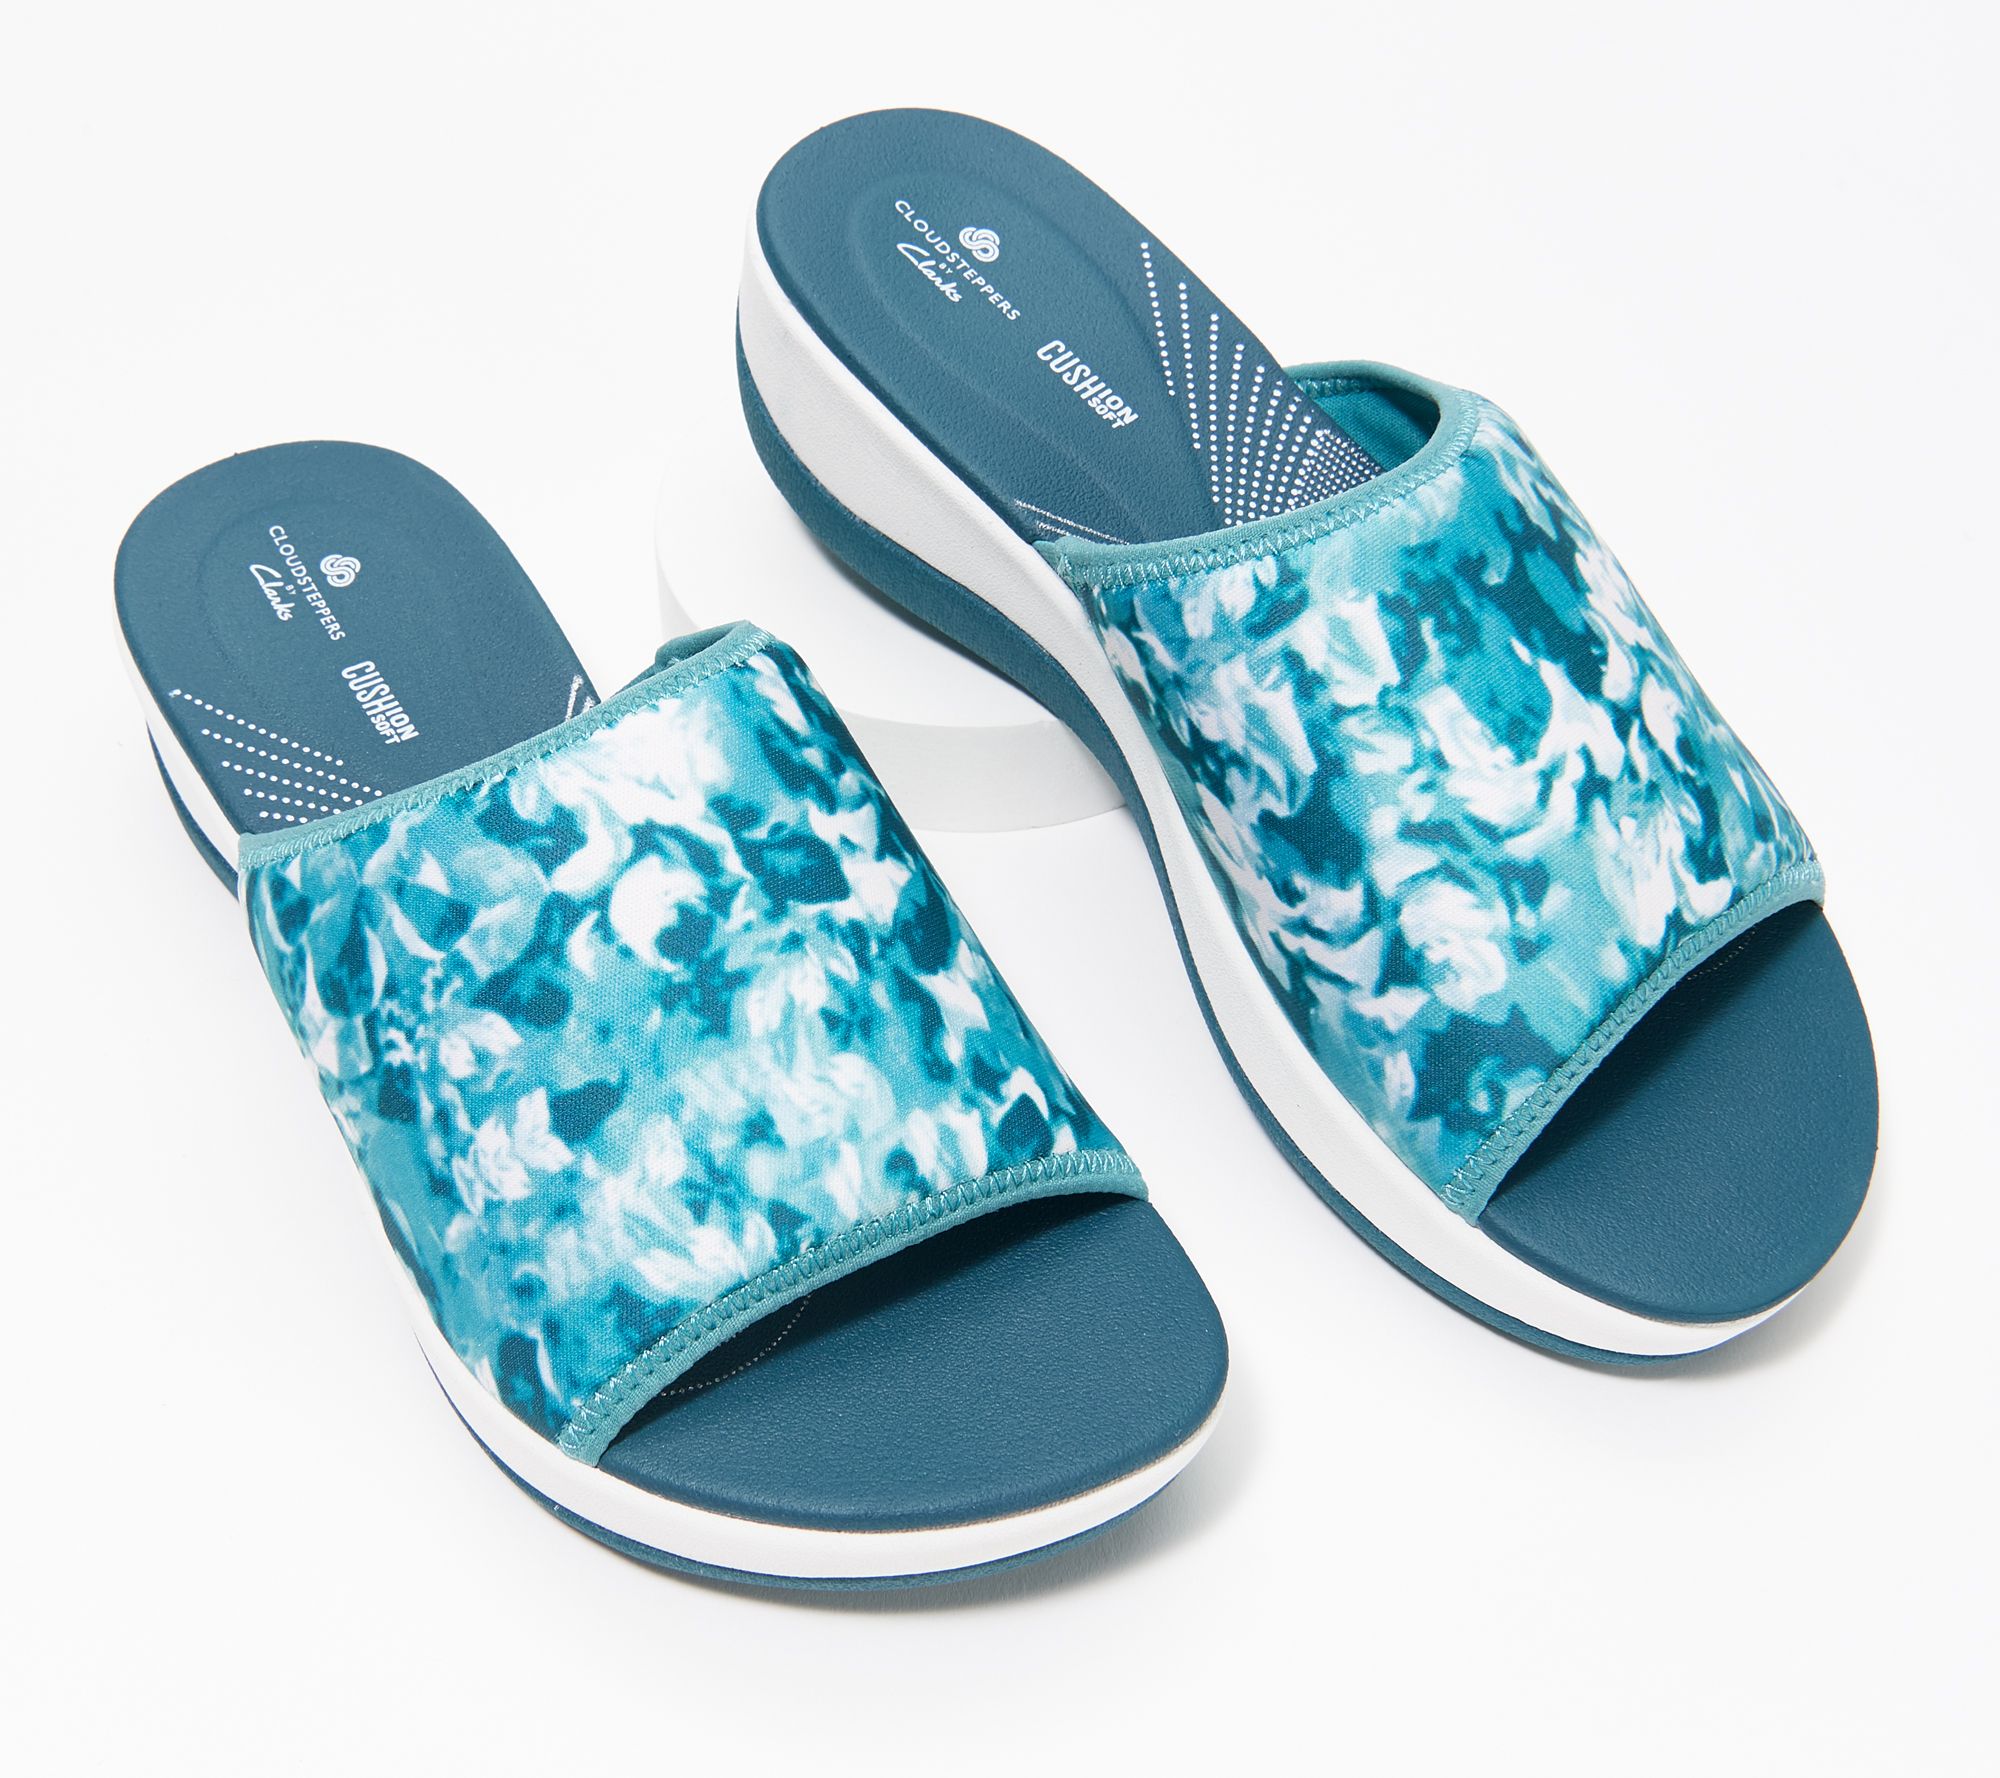 CLOUDSTEPPERS by Clarks Jersey Slide Sandals - Arla Nora - QVC.com